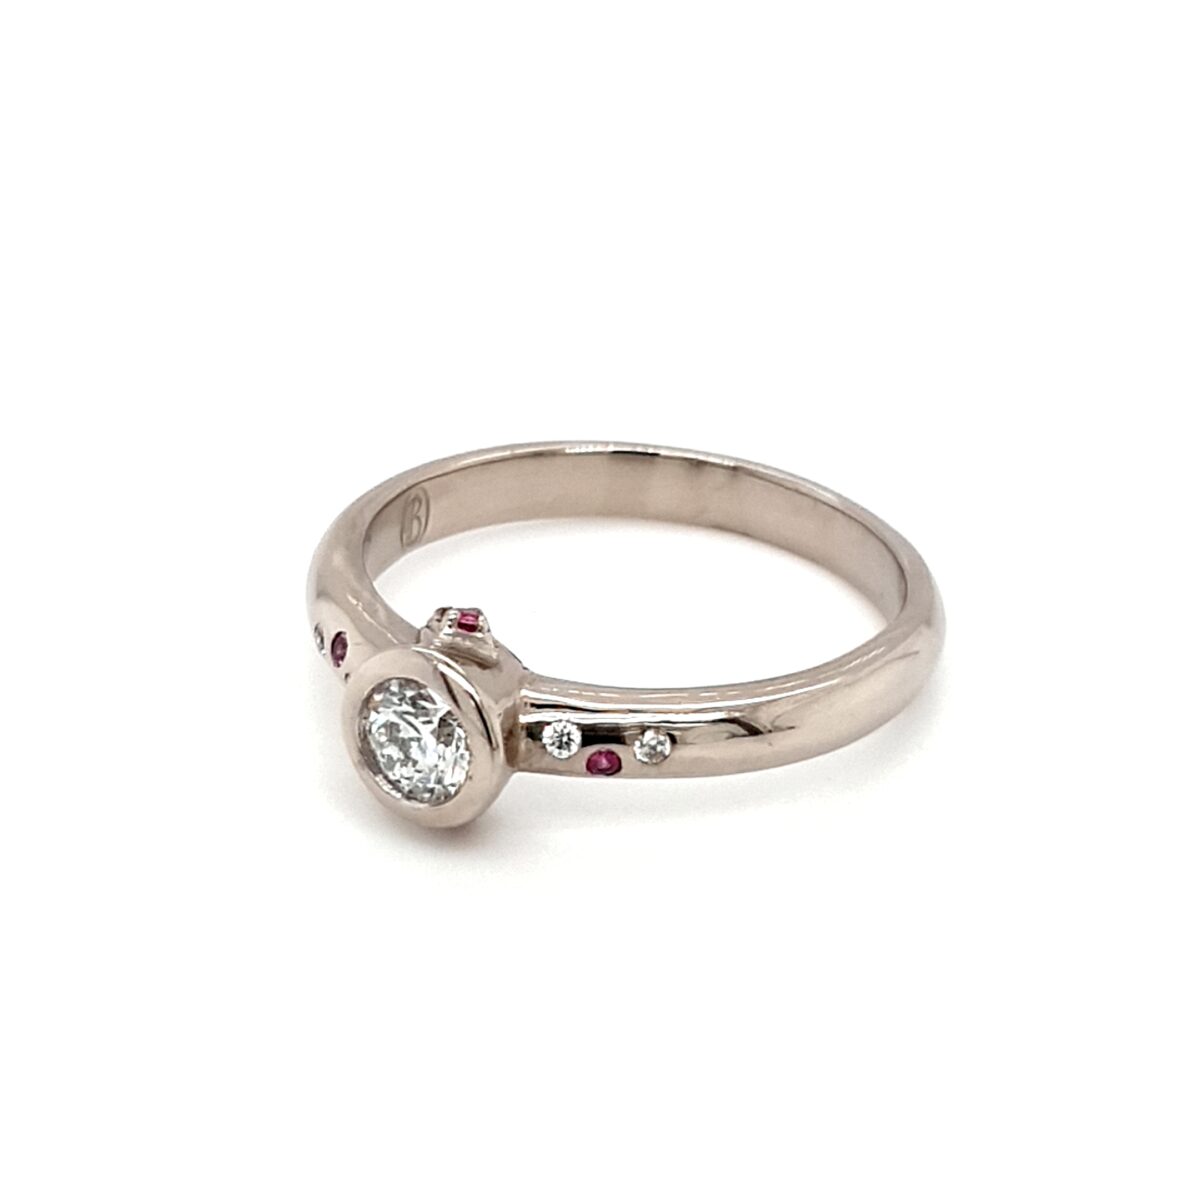 Leon Bakers 18K White Gold Diamond and Pink Sapphire Engagement Ring_1